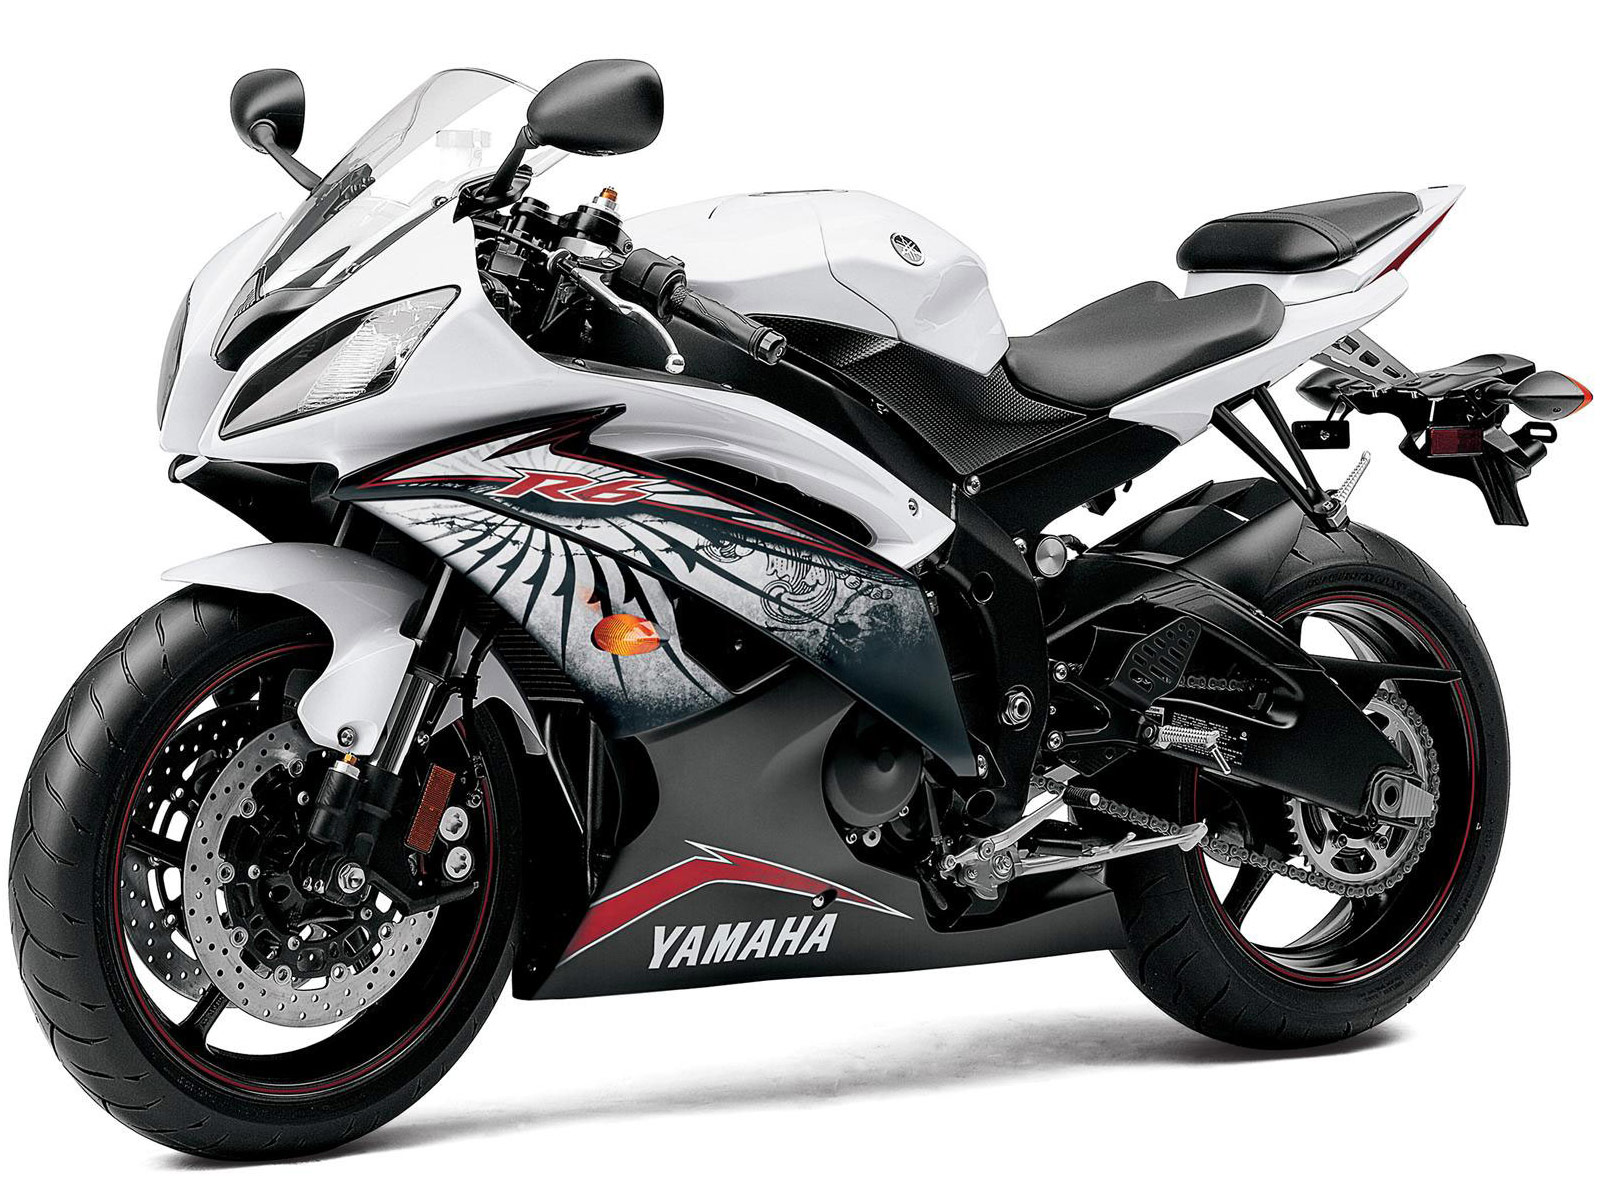  2012: 2012 YAMAHA YZFR6 Motorcycle pictures, review, specifications